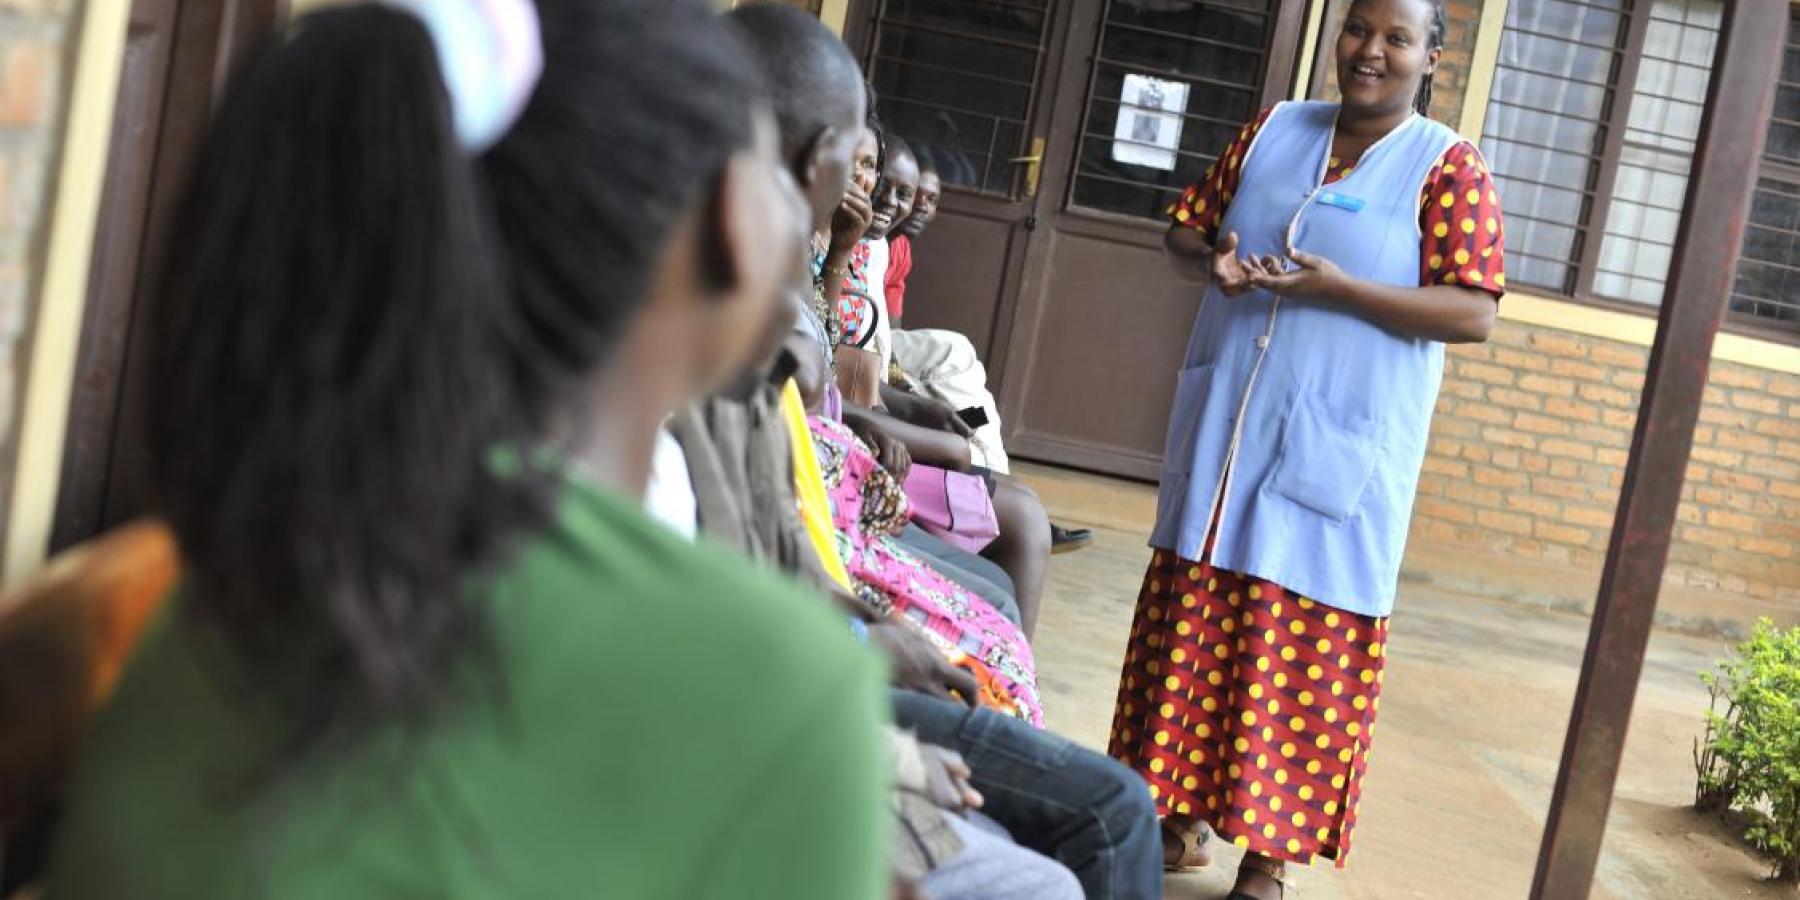 A health worker speaks to clients waiting for services at a clinic in Rwanda